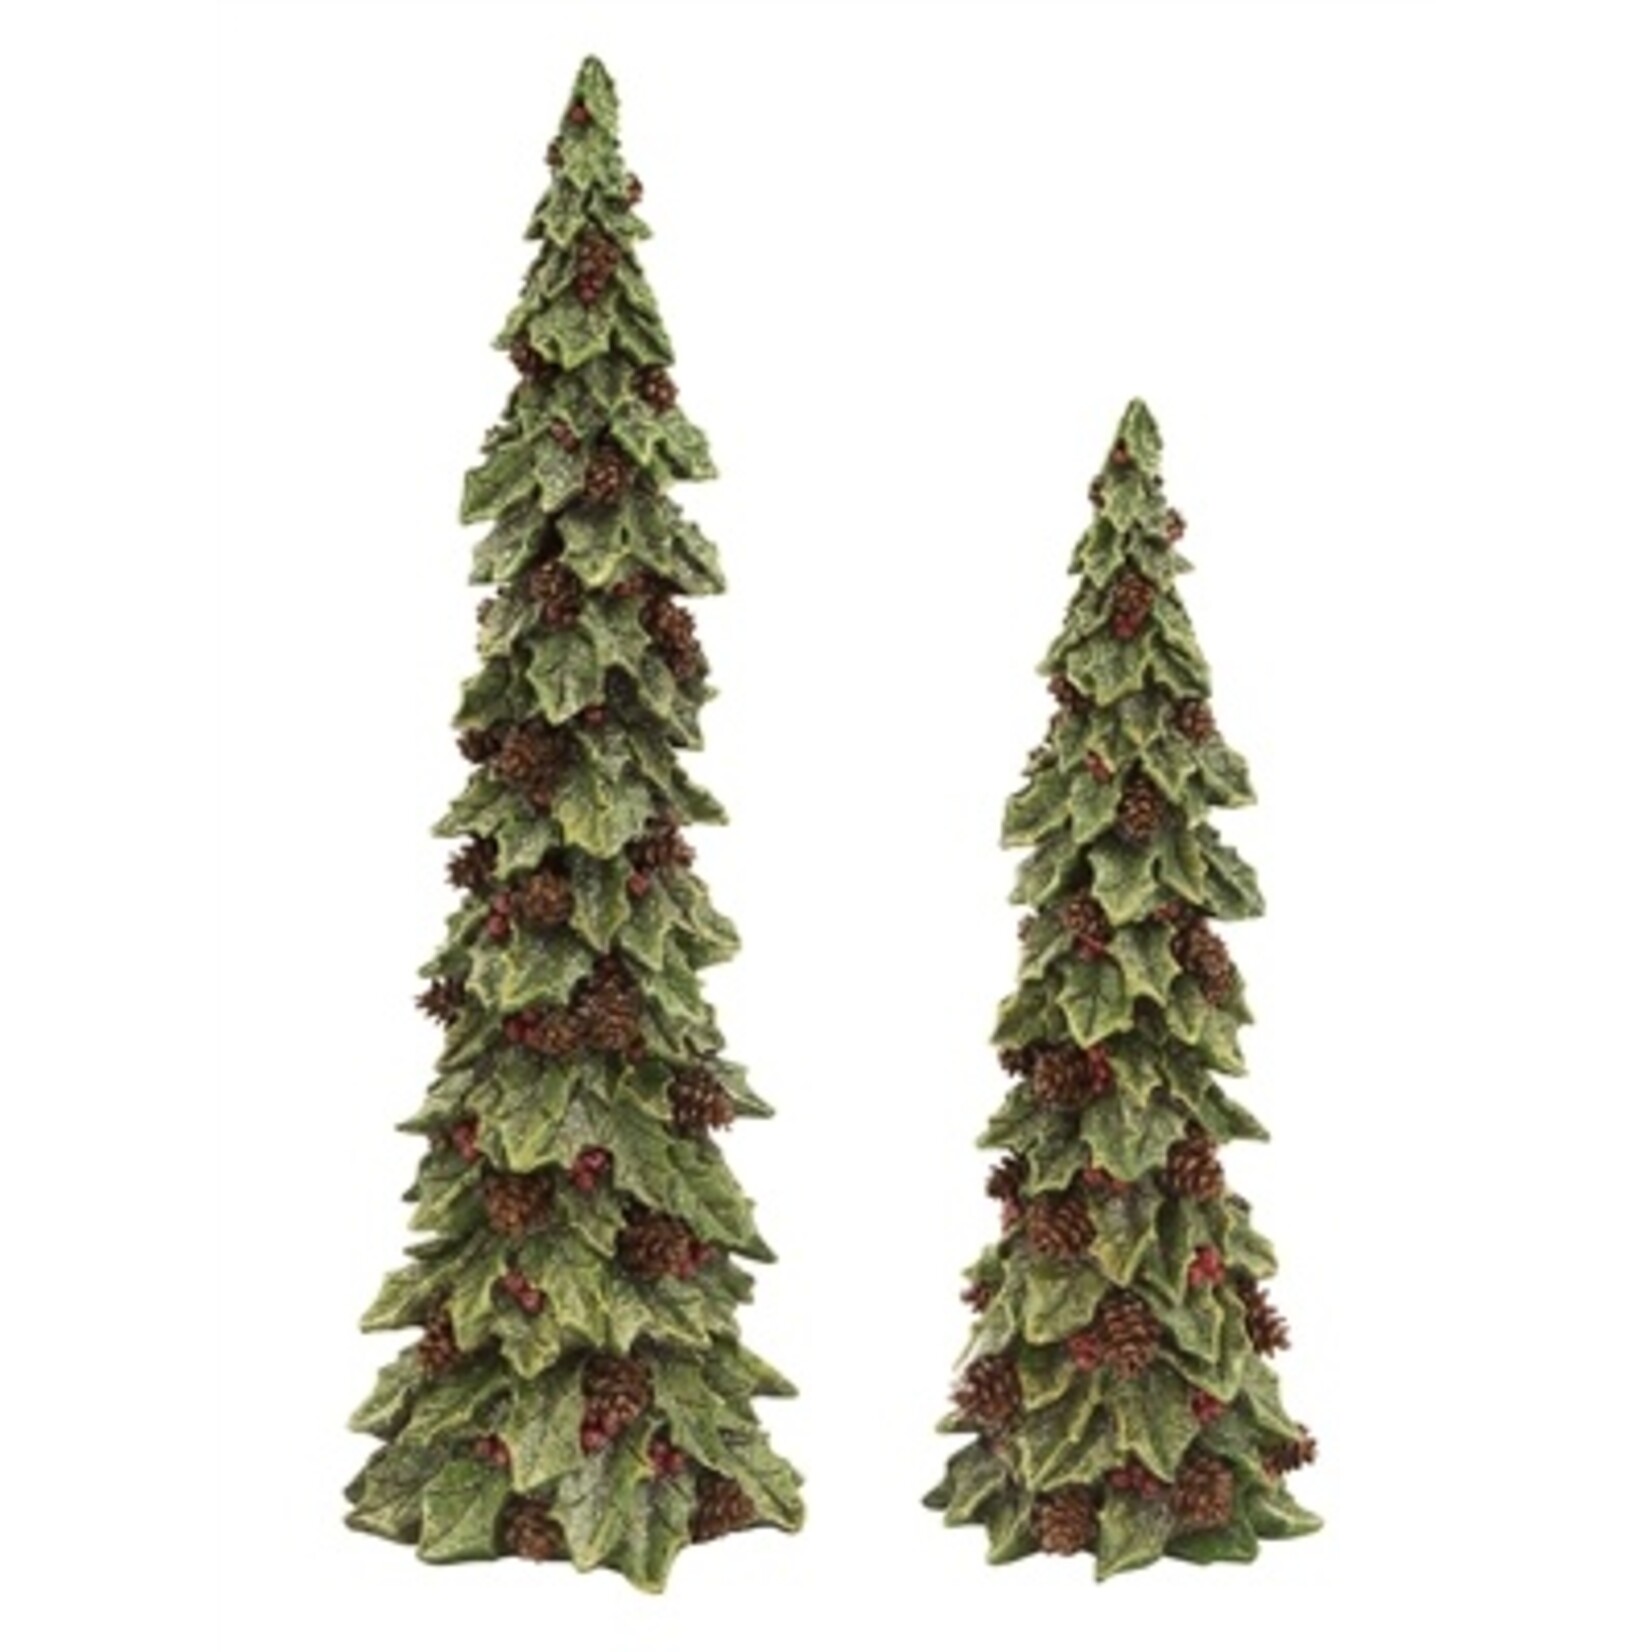 Melrose International Holly Trees with Pine Cones